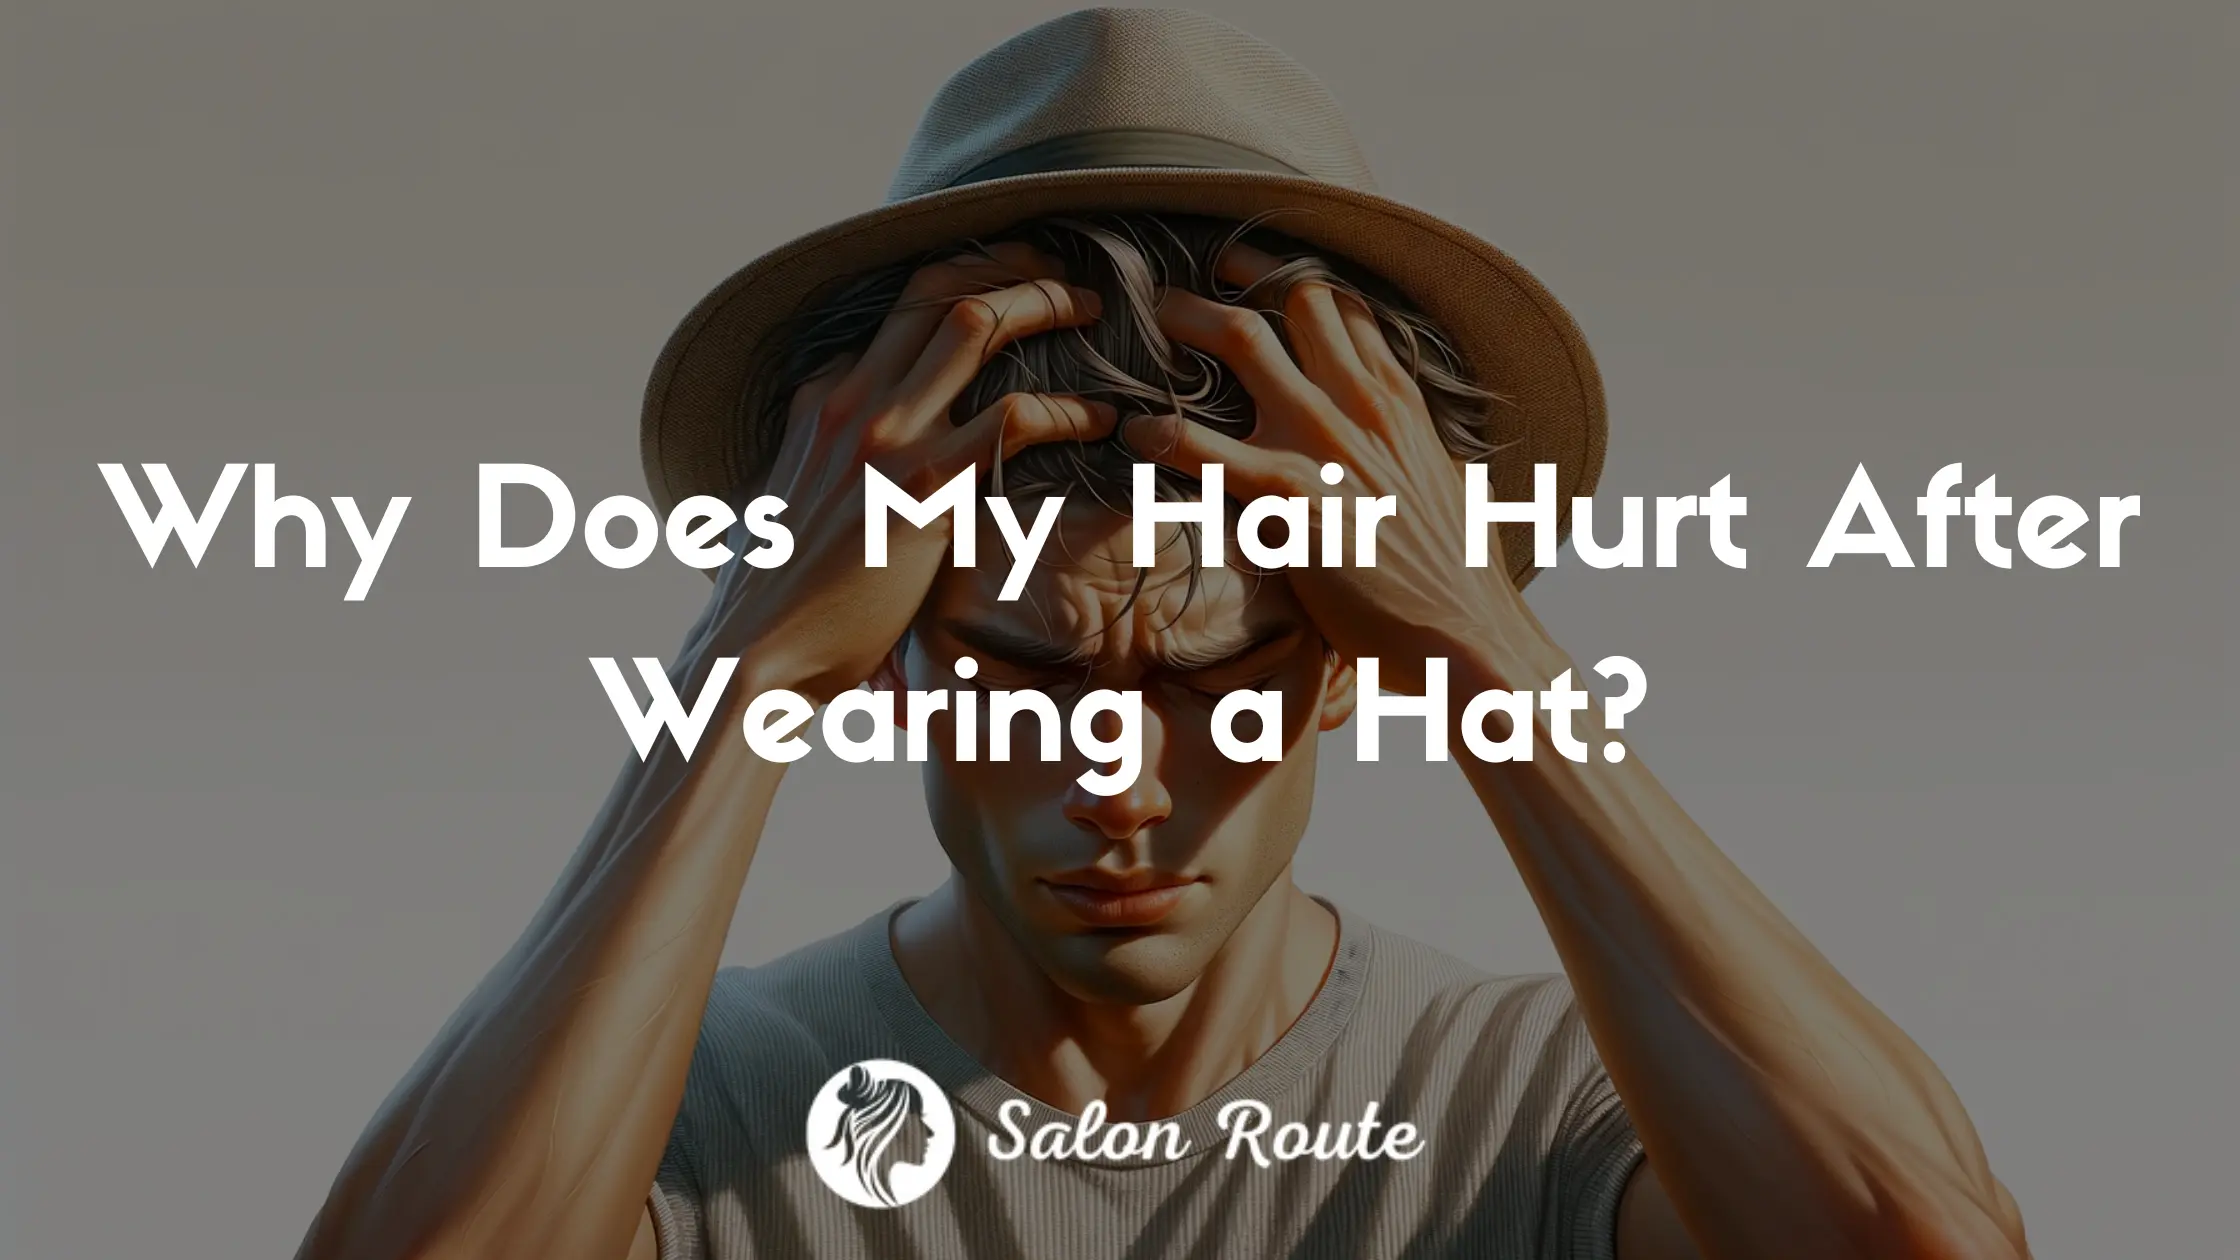 Why Does My Hair Hurt After Wearing a Hat?